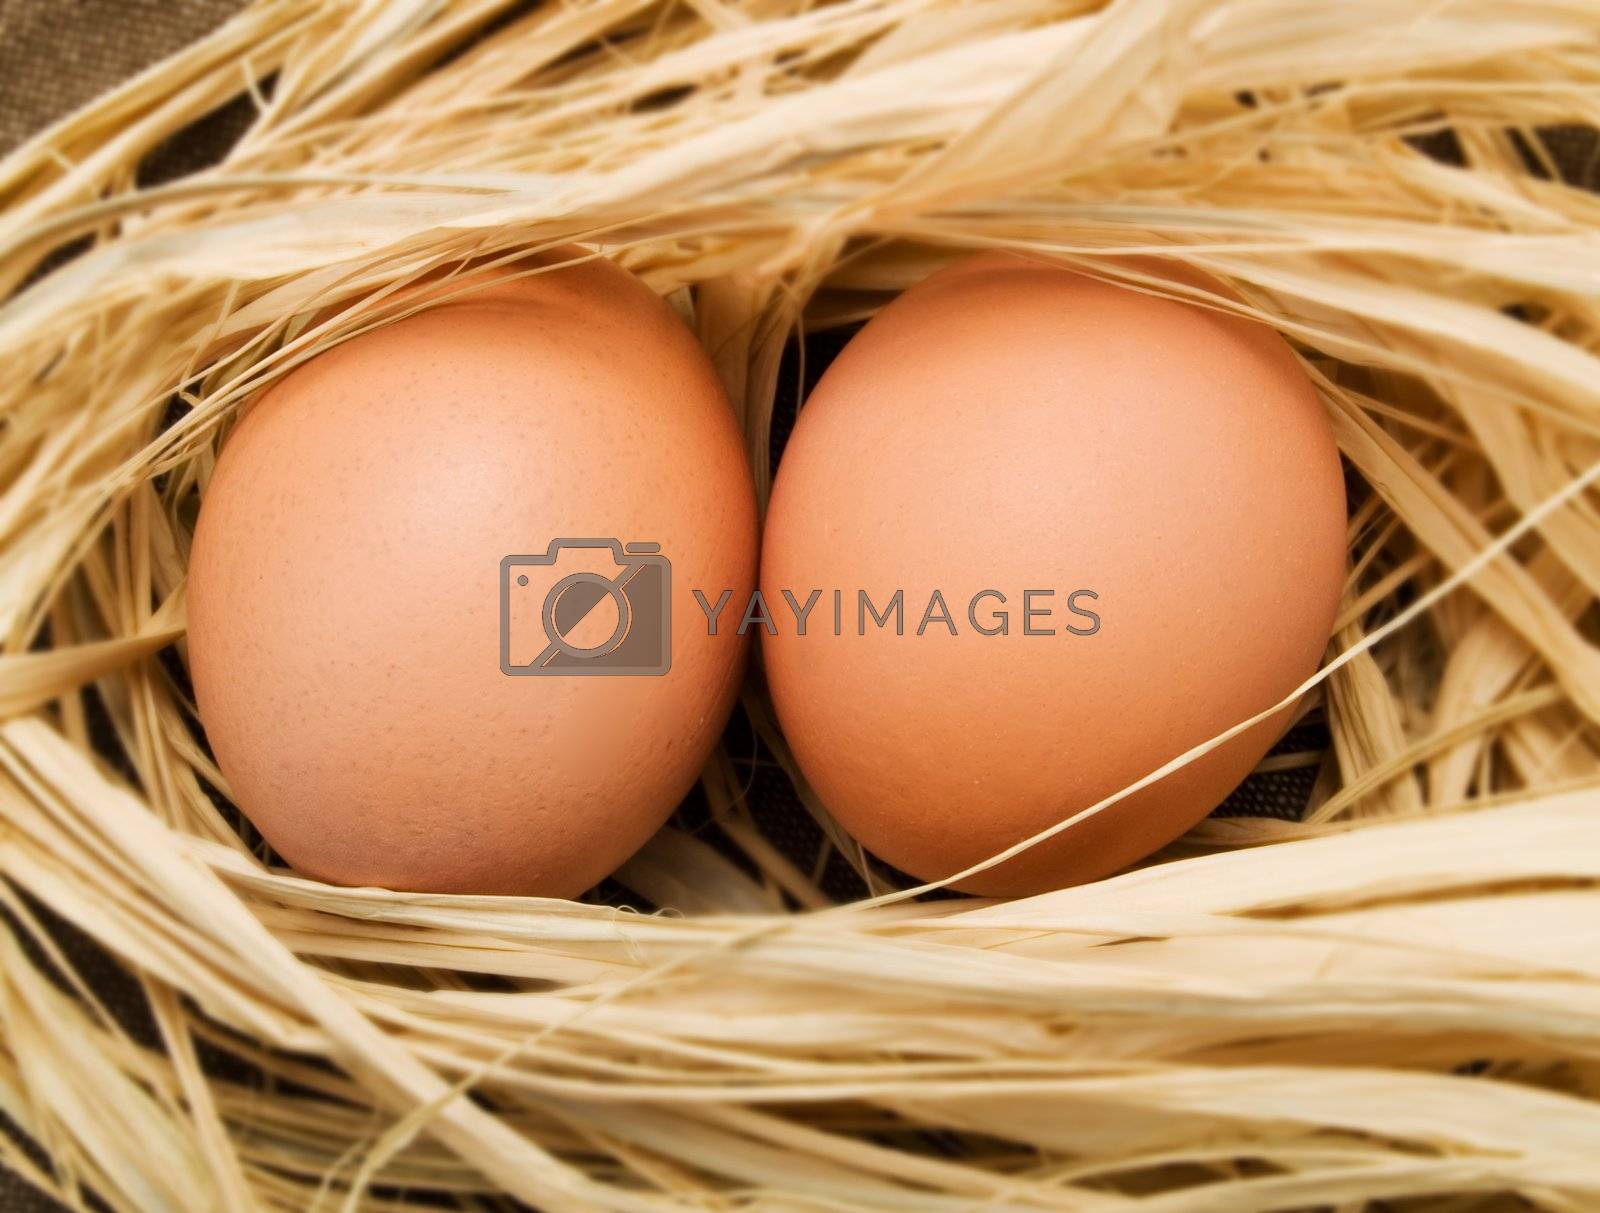 Royalty free image of Eggs by henrischmit